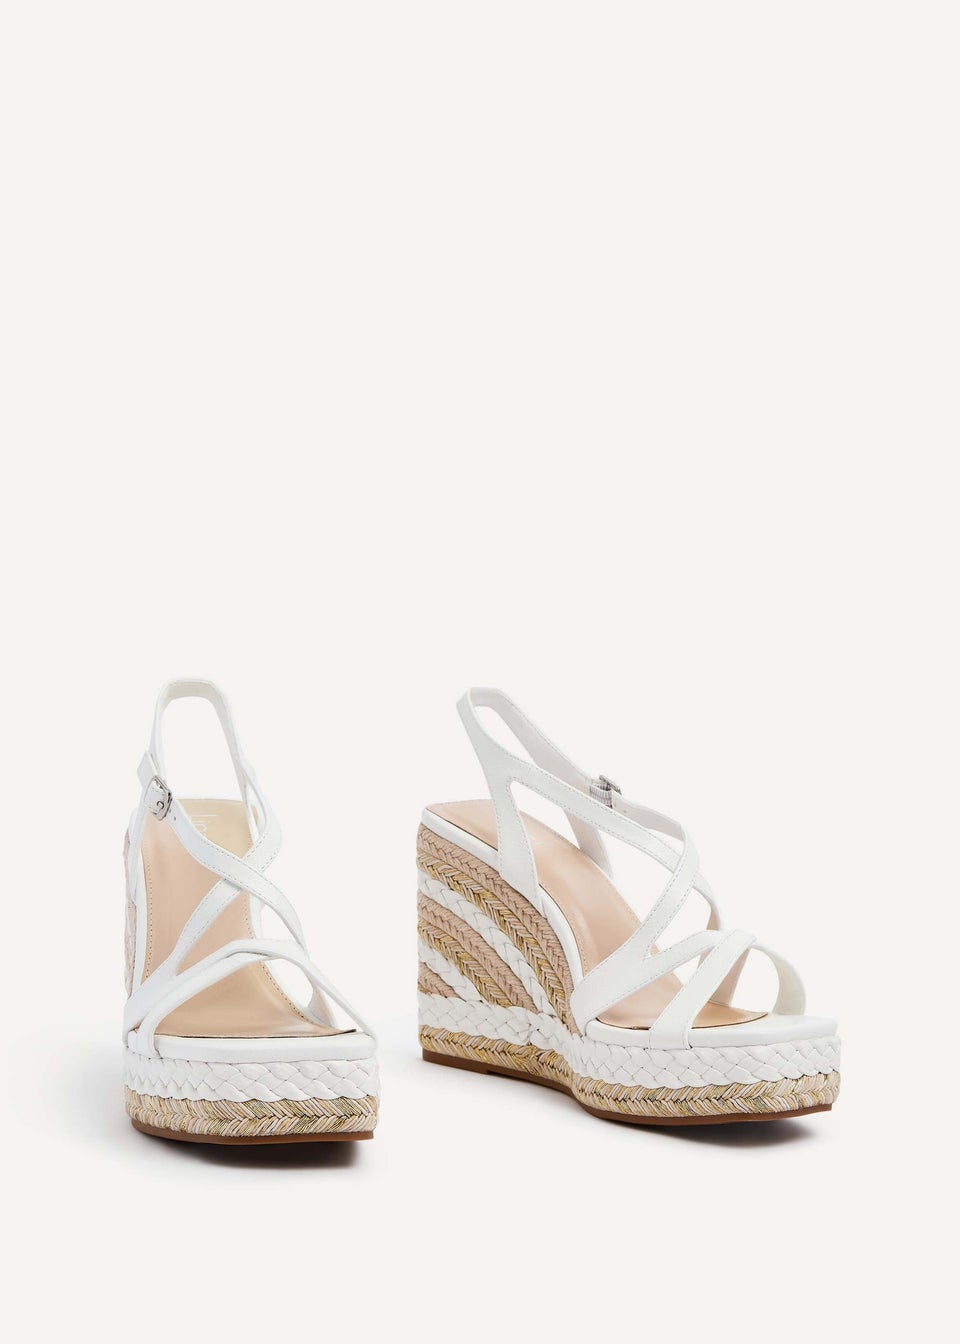 Linzi Marbella White Faux Leather Crossover Metallic Rope Wedge